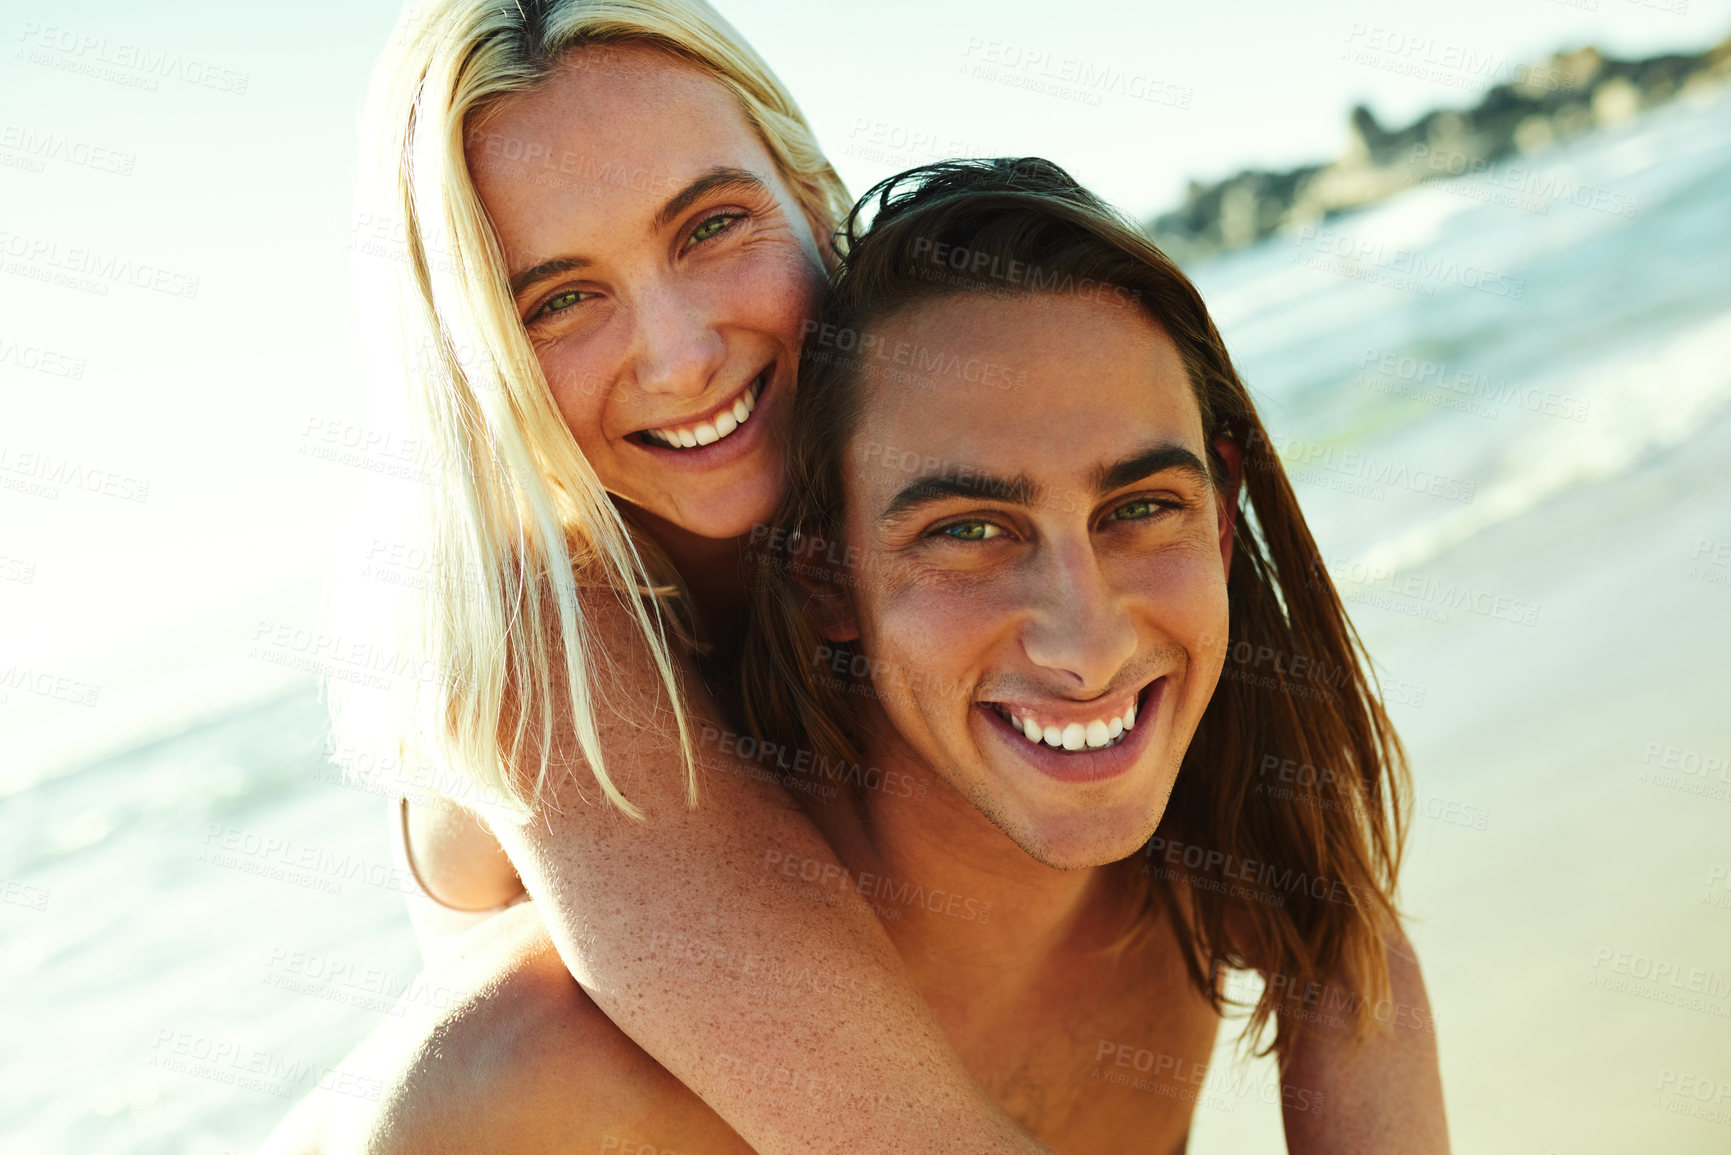 Buy stock photo Portrait of a young man giving his girlfriend a piggyback ride at the beach